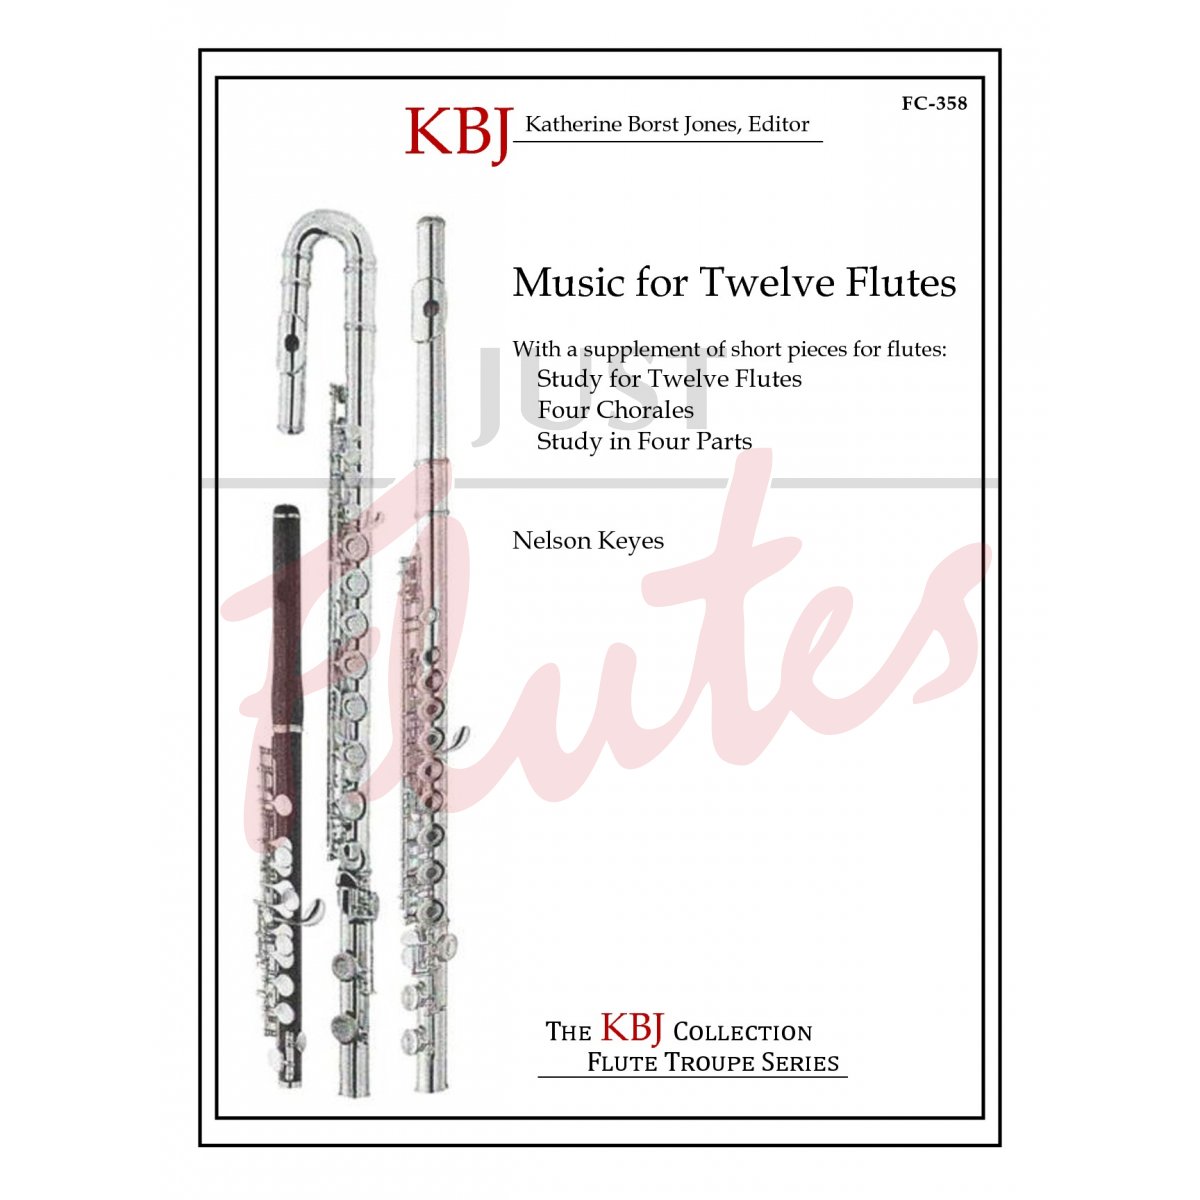 Music for 12 Flutes